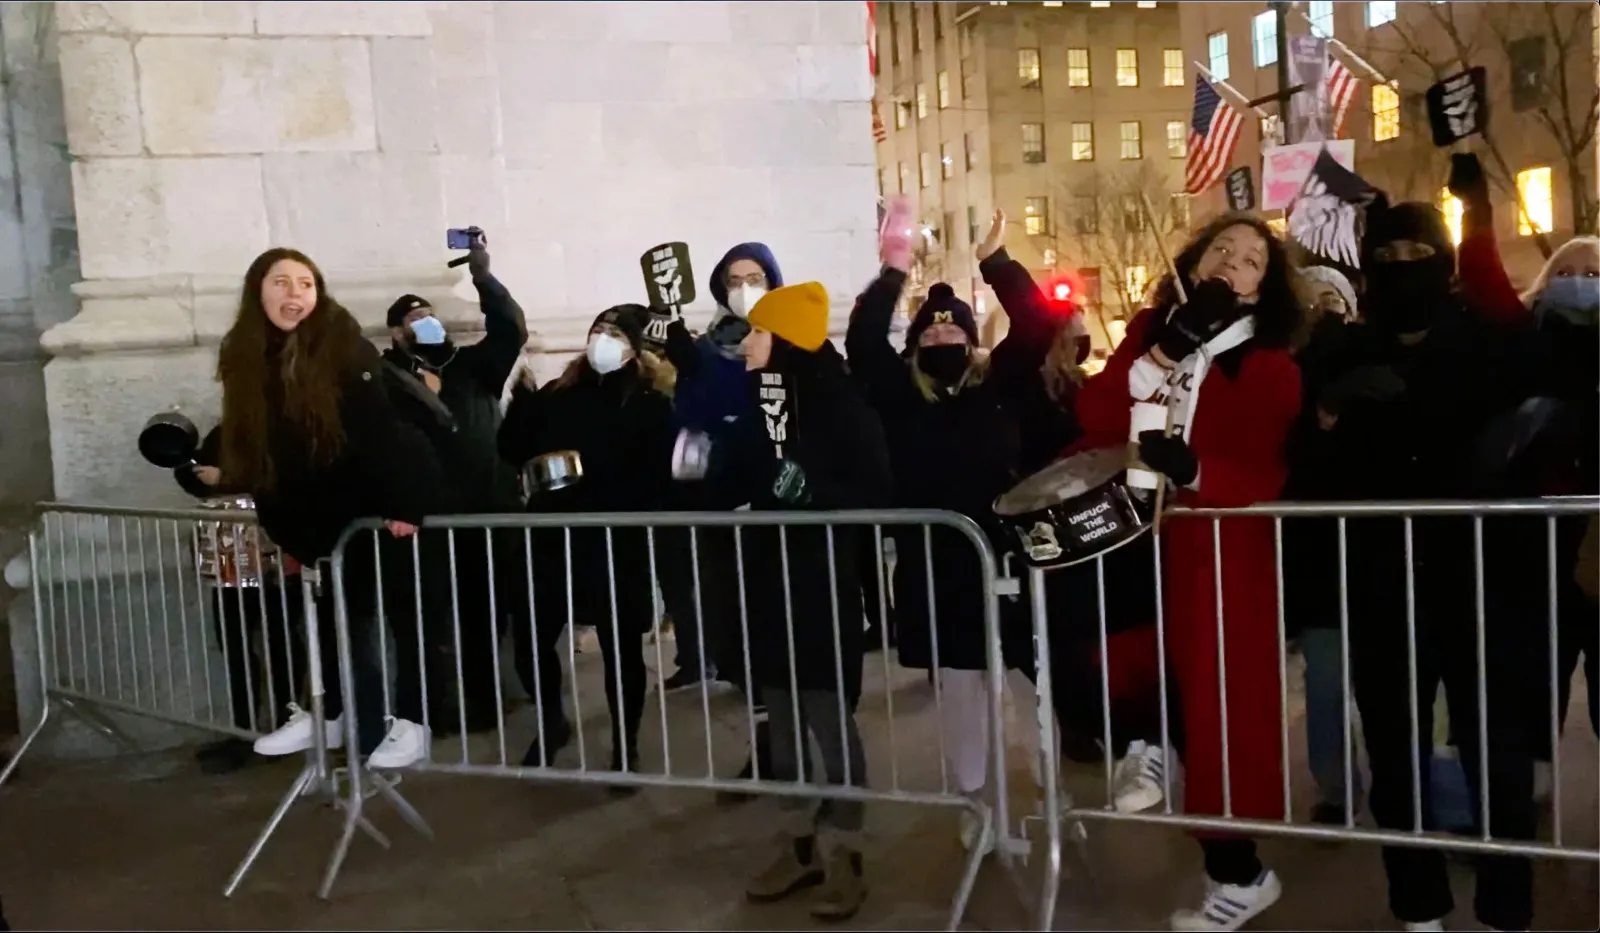 Pro-abortion demonstrators yelled obscenities at people leaving a pro-life vigil at St. Patrick's Cathedral in New York City on Jan. 22, 2022.?w=200&h=150